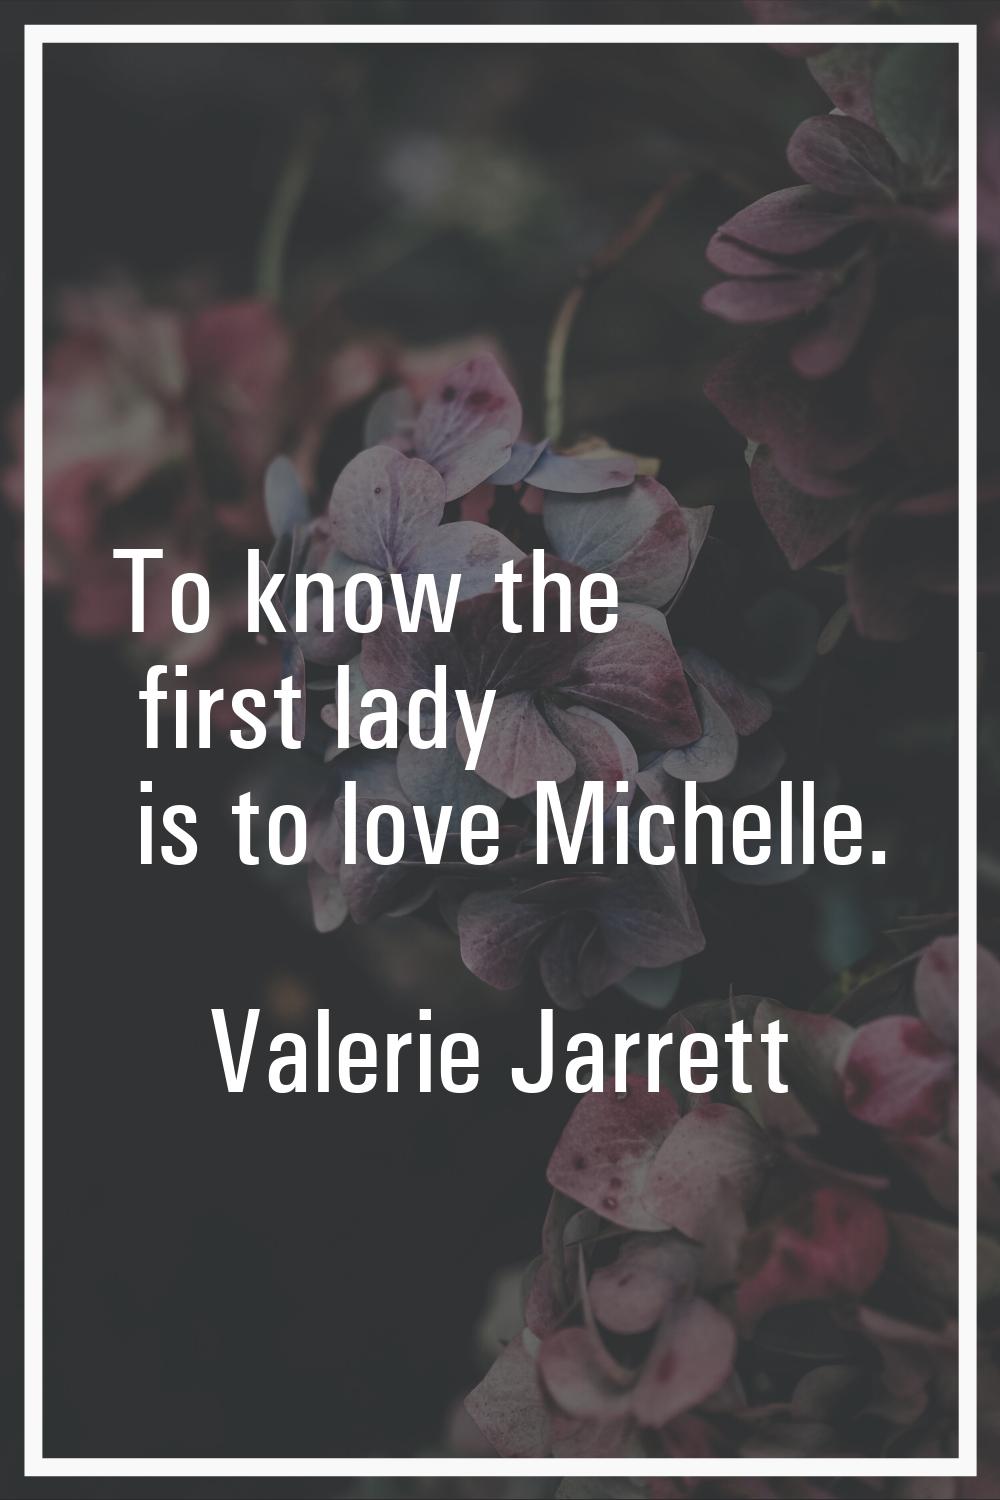 To know the first lady is to love Michelle.